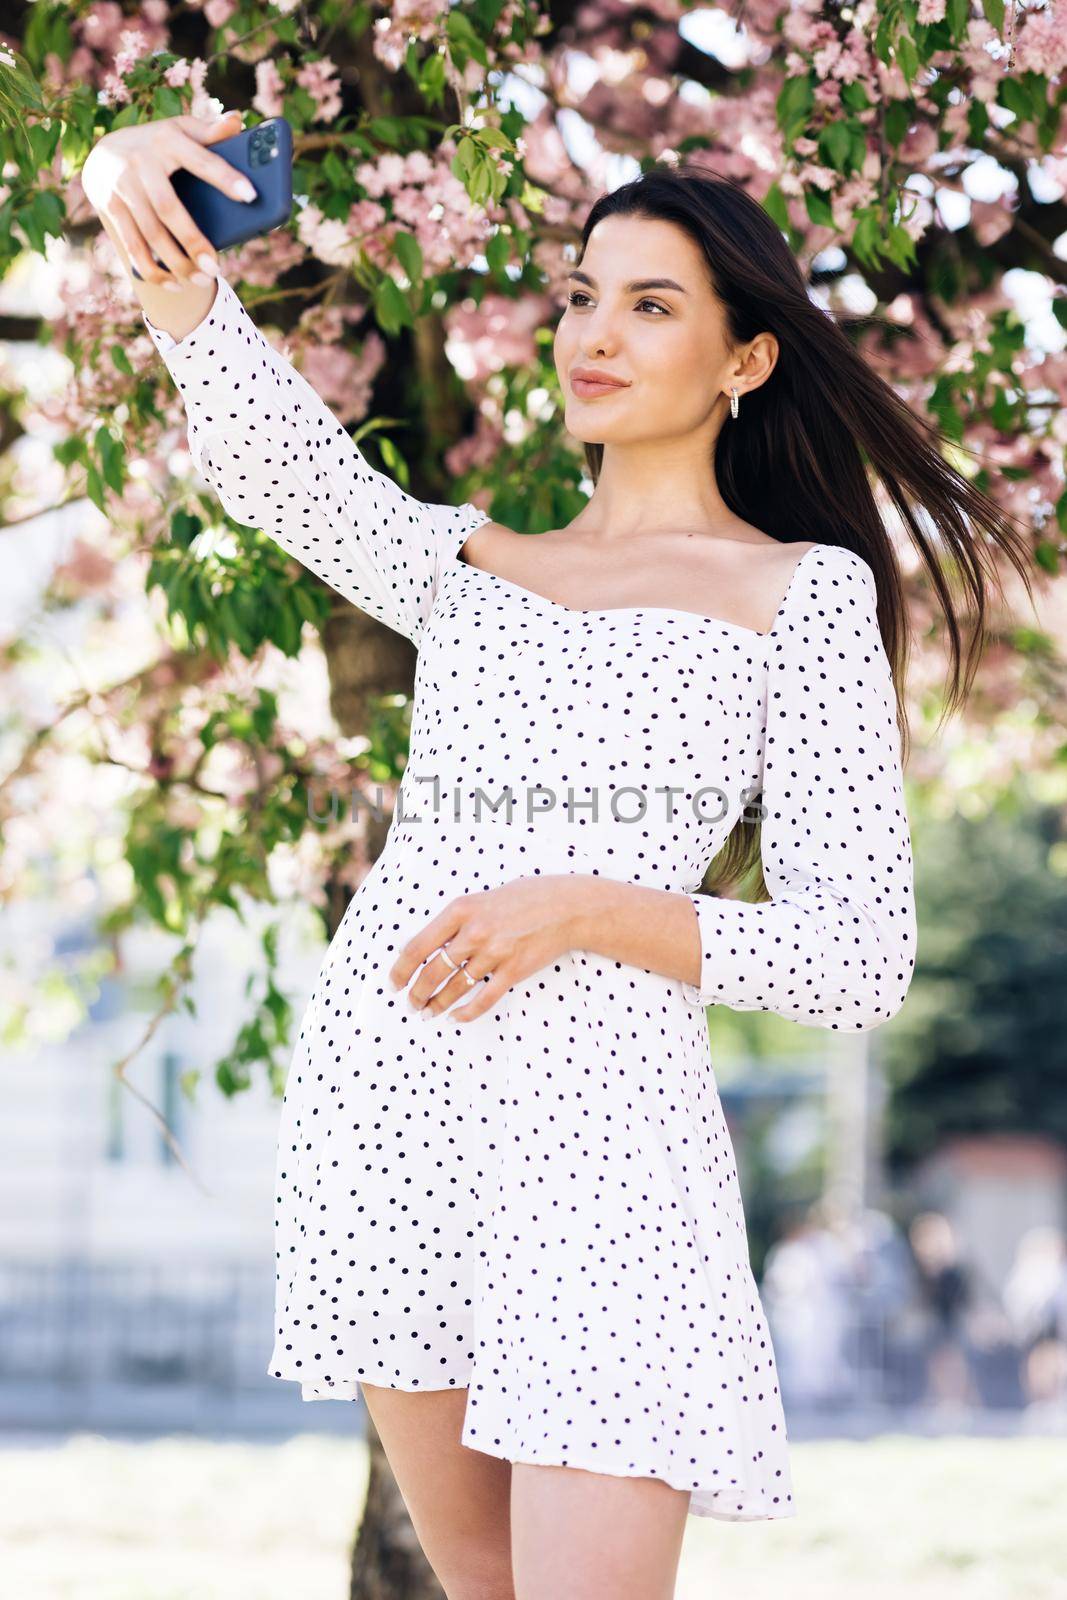 Female showing positive face emotions. Young woman in summer white dress taking selfie self portrait photos on smartphone. Model posing on park sakura trees background.